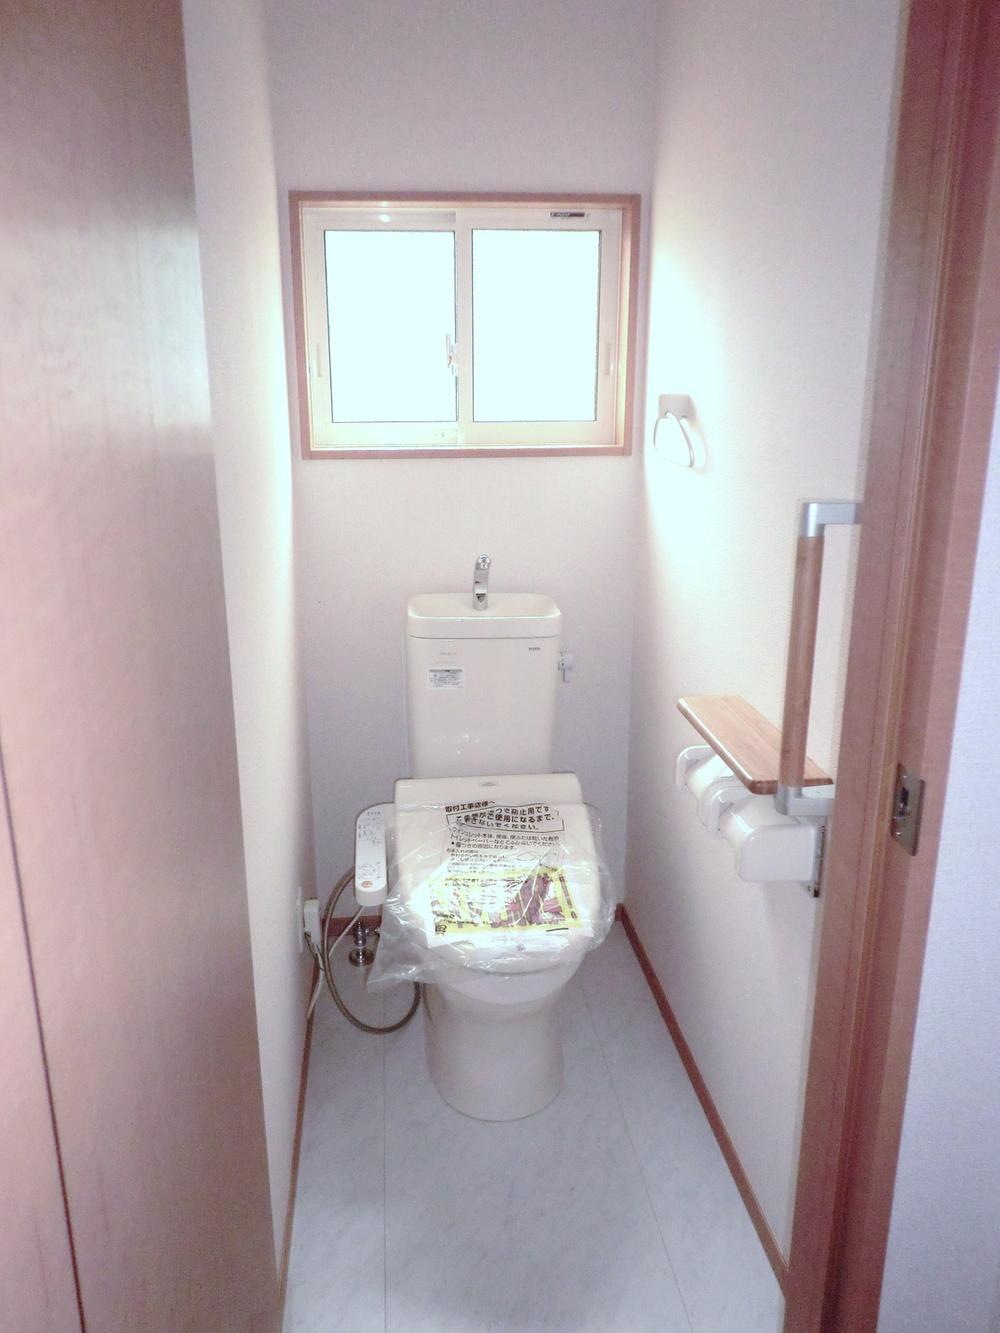 Toilet. 1, 2 Kaitomo, handrail, W cigarette machine with counter, Towel ring, It marked with, Washlet is. 